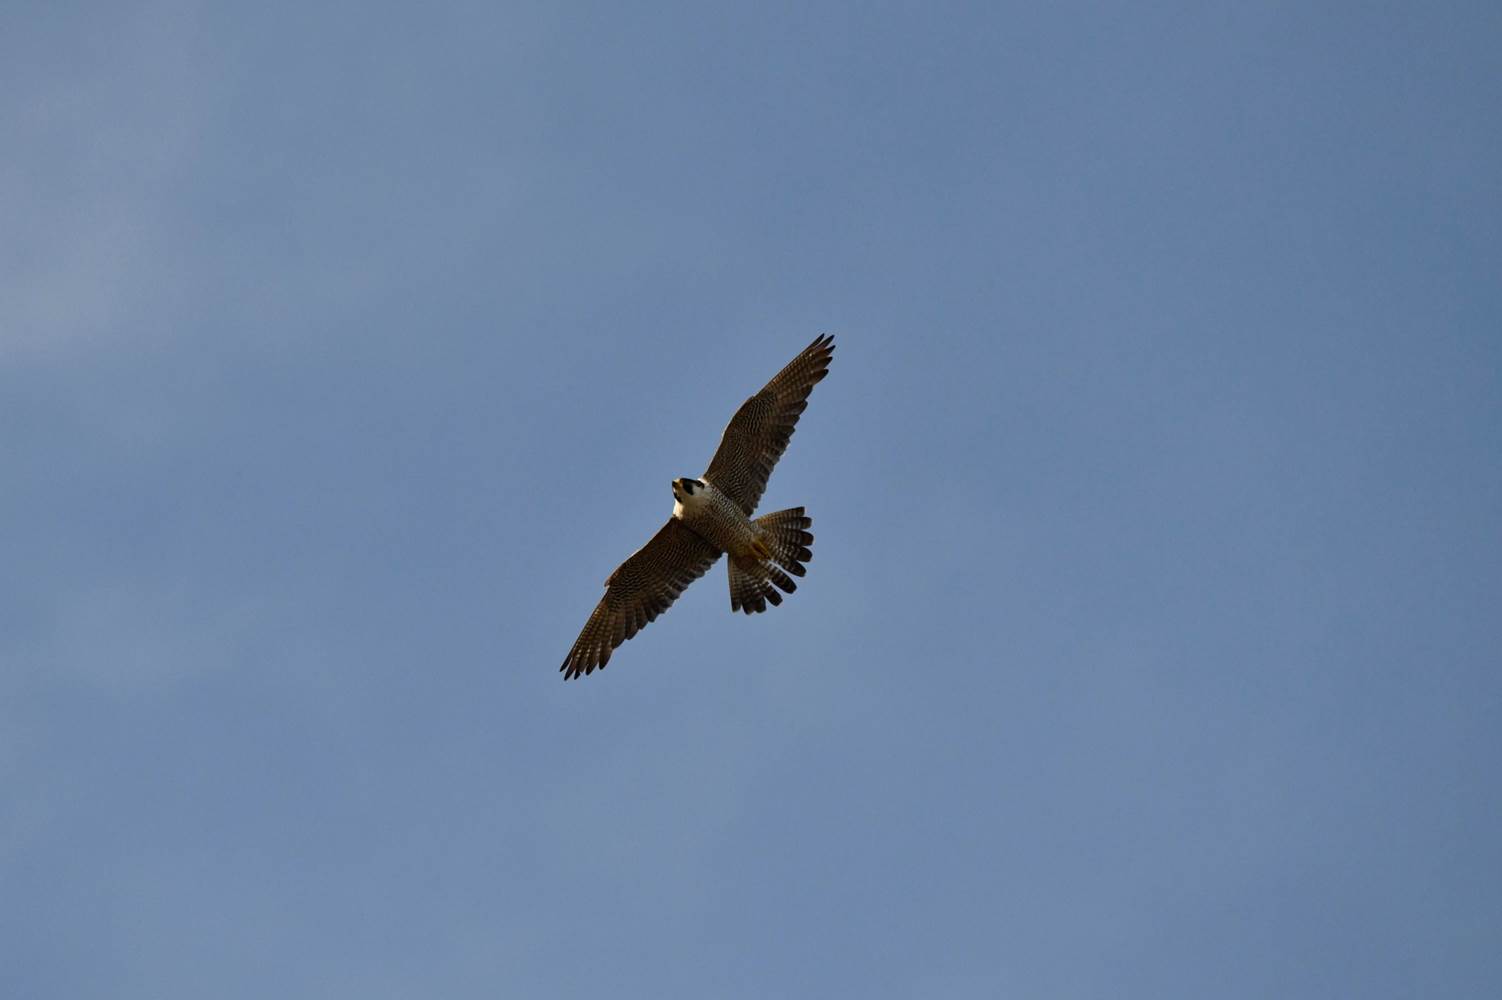 A hawk flying in the sky

Description automatically generated